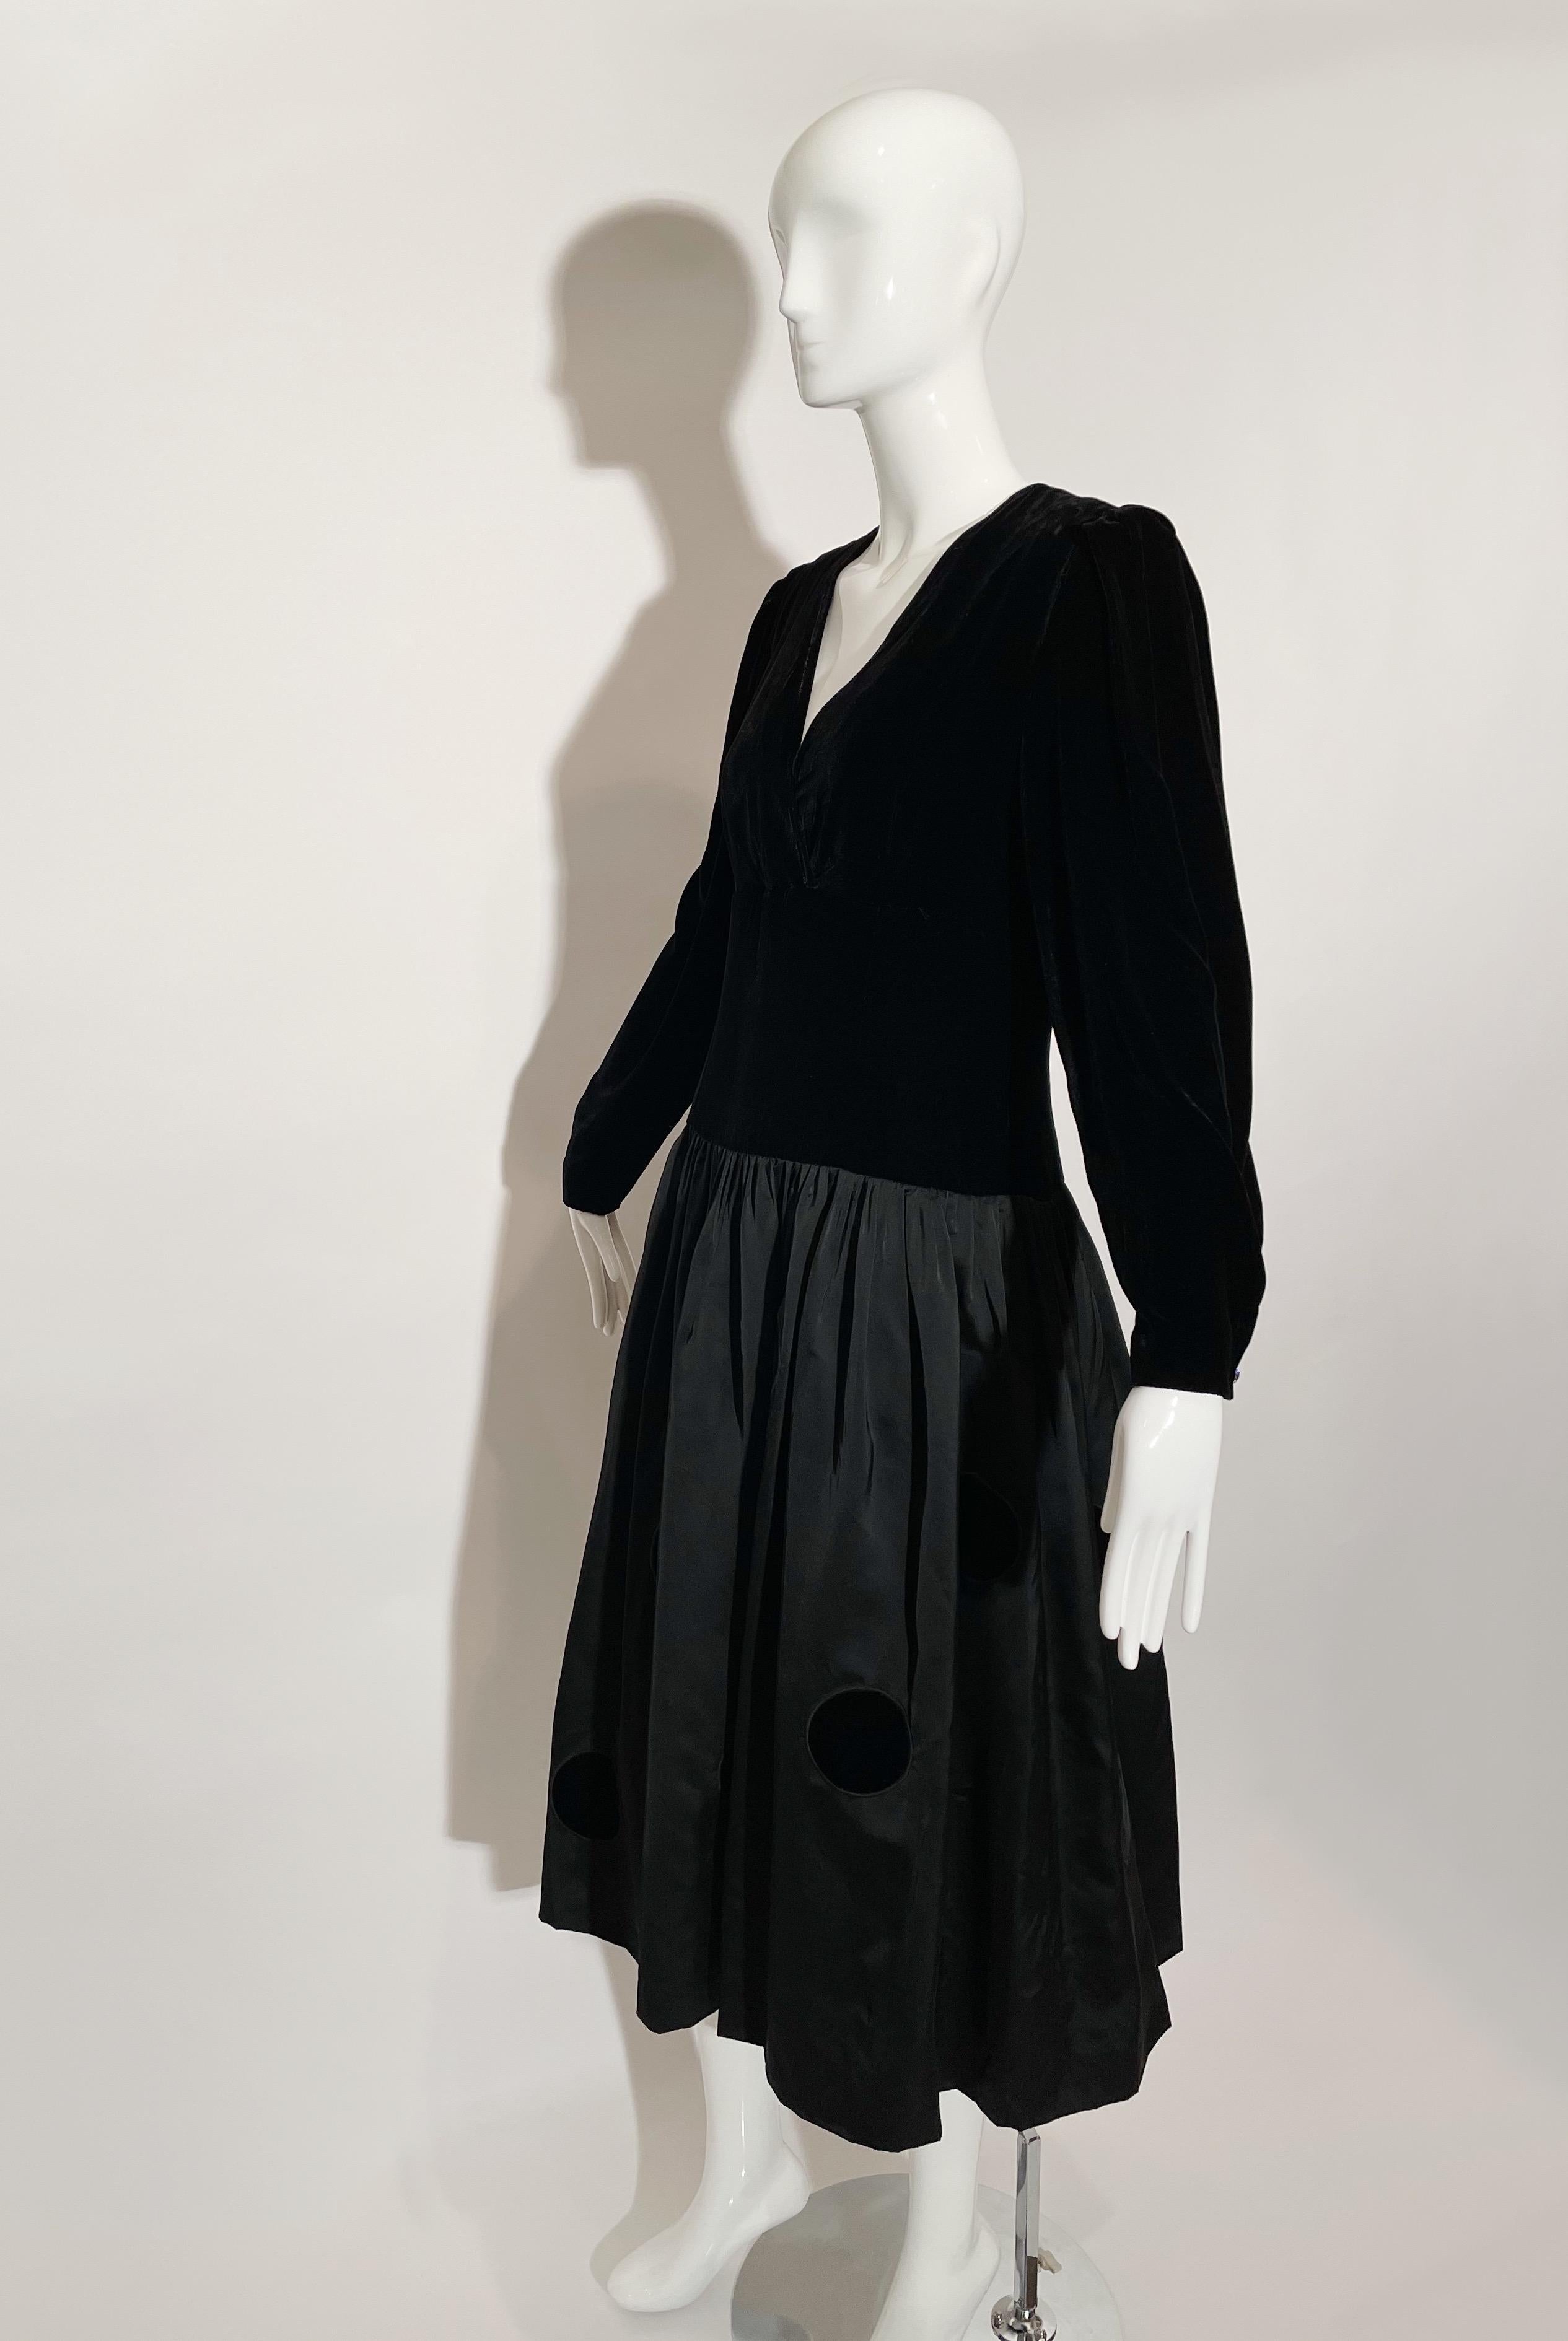 Louis Feraud Black Polka Dot Dress  In Good Condition For Sale In Waterford, MI